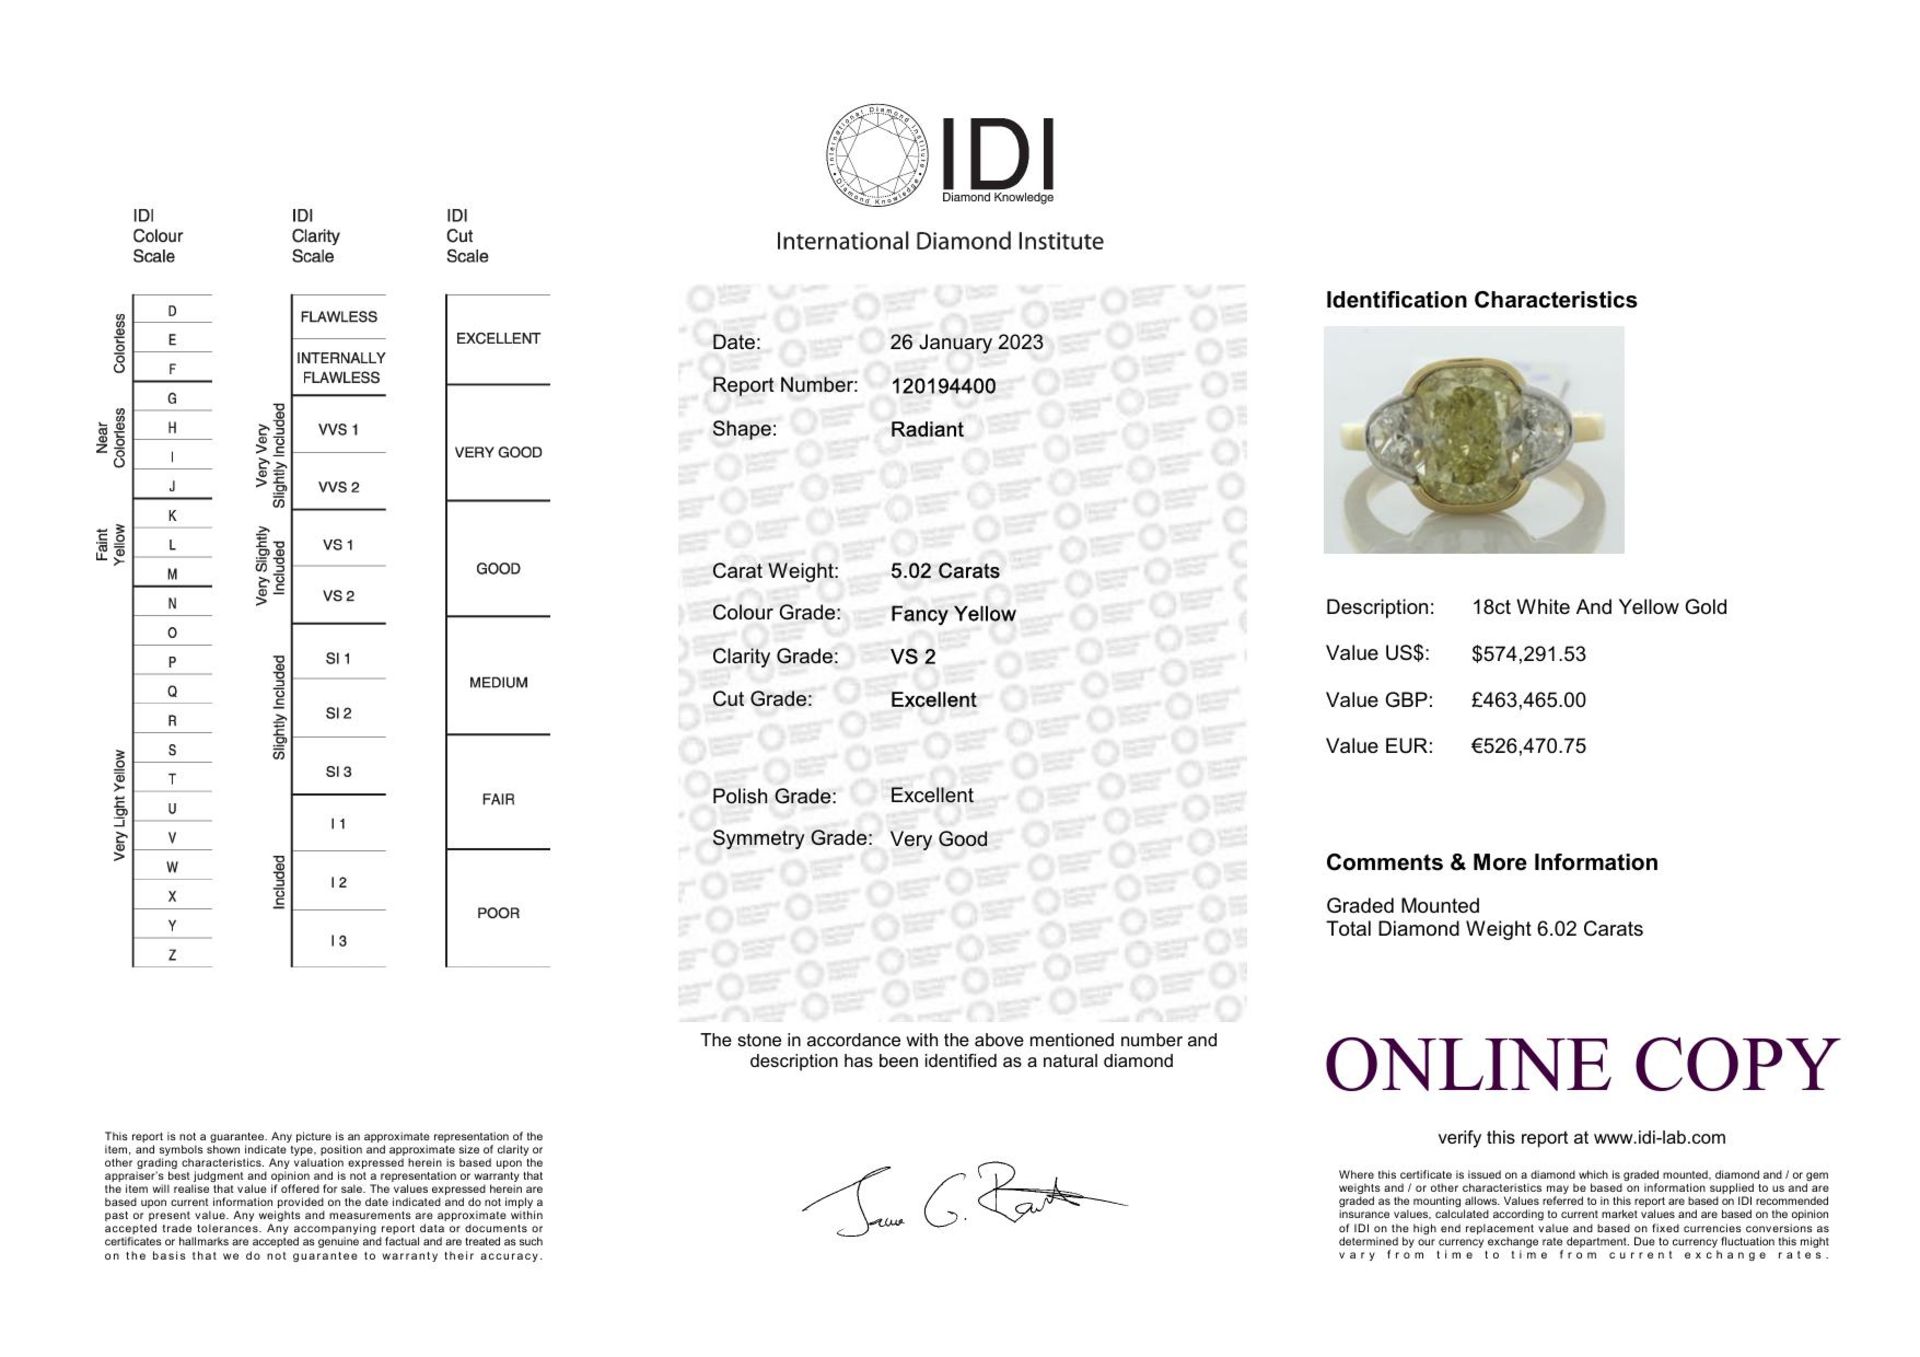 18ct Yellow Gold Three Stone Diamond Ring (5.02) 6.02 Carats - Valued By IDI £463,465.00 - A - Image 2 of 2